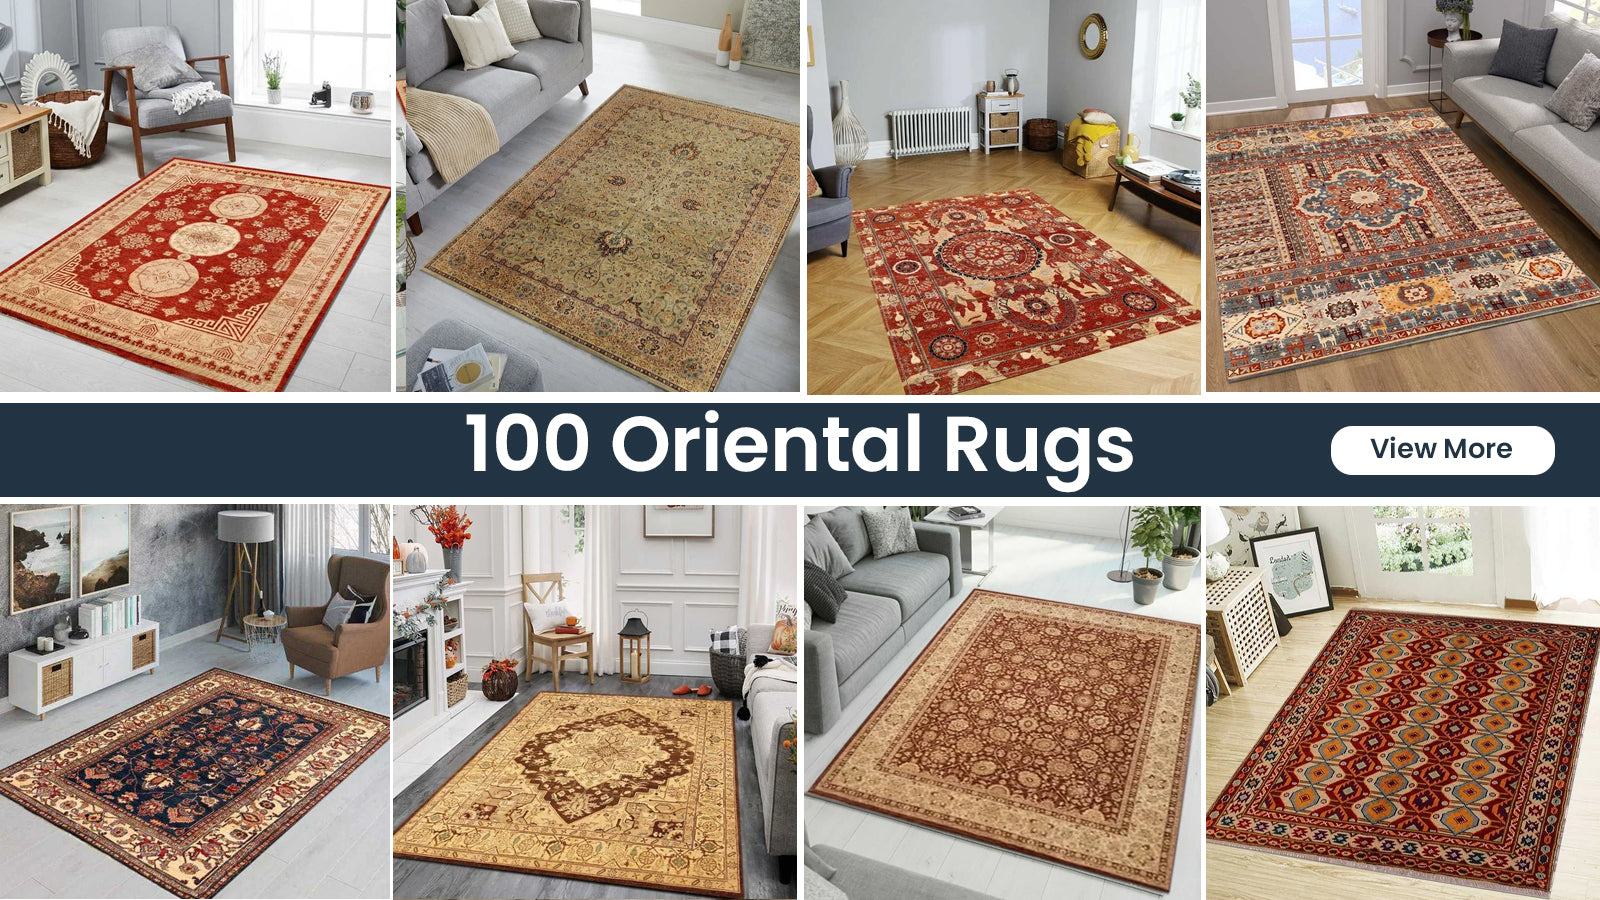 Western Bedding Shopping Guide: What to Look For and Where to Buy -  Southwestern Rugs Depot